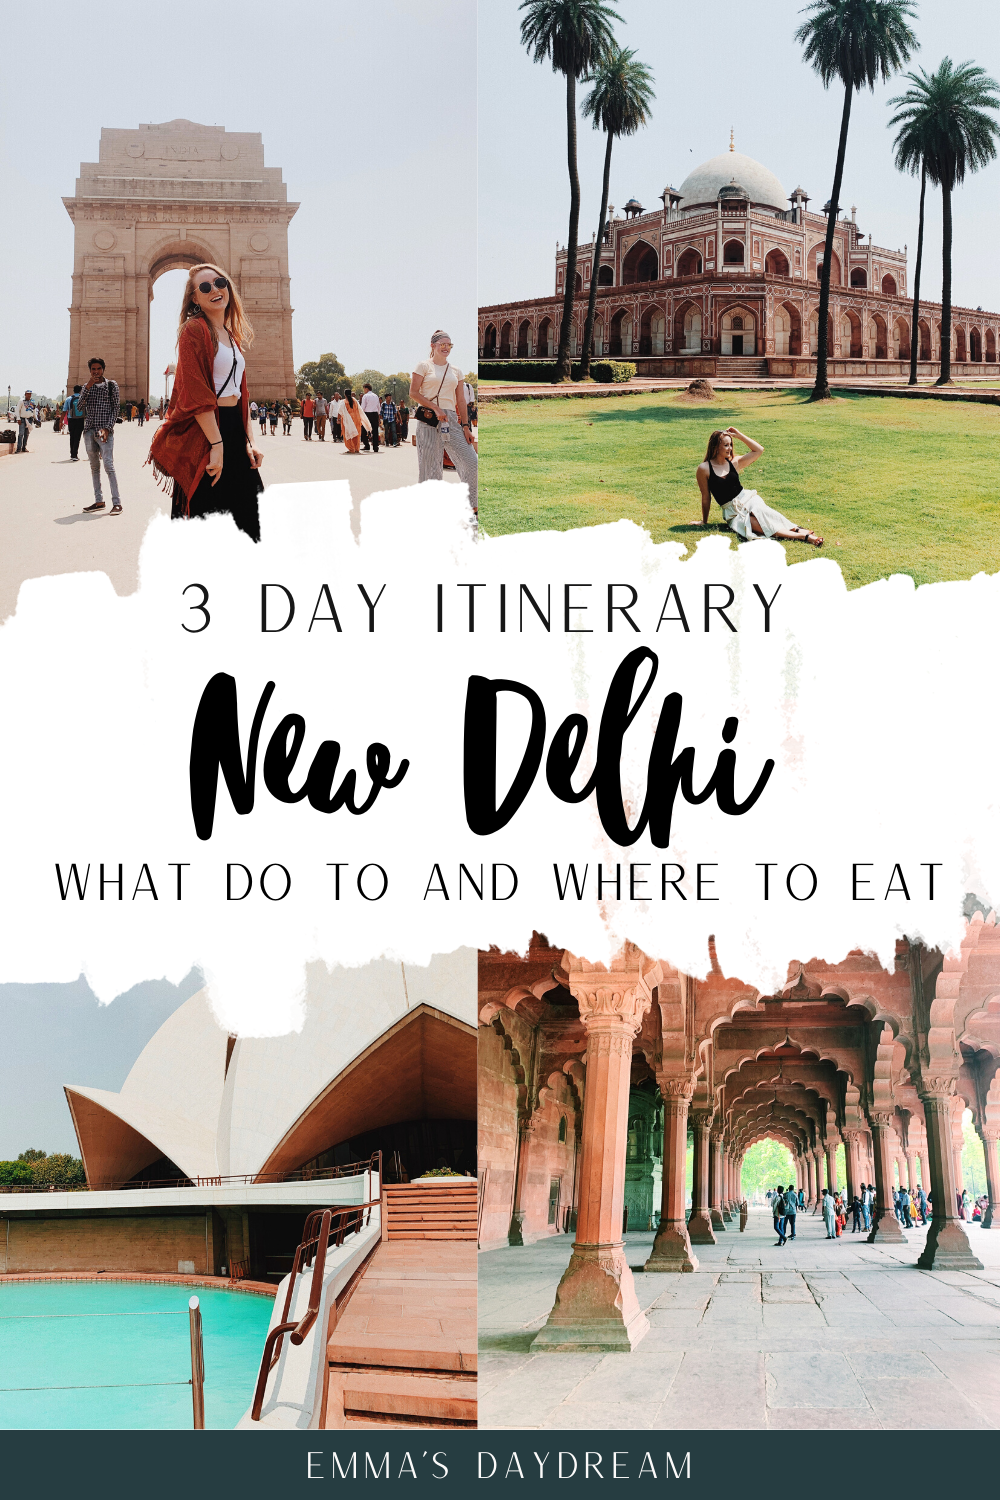 Top 10 places to visit in New Delhi